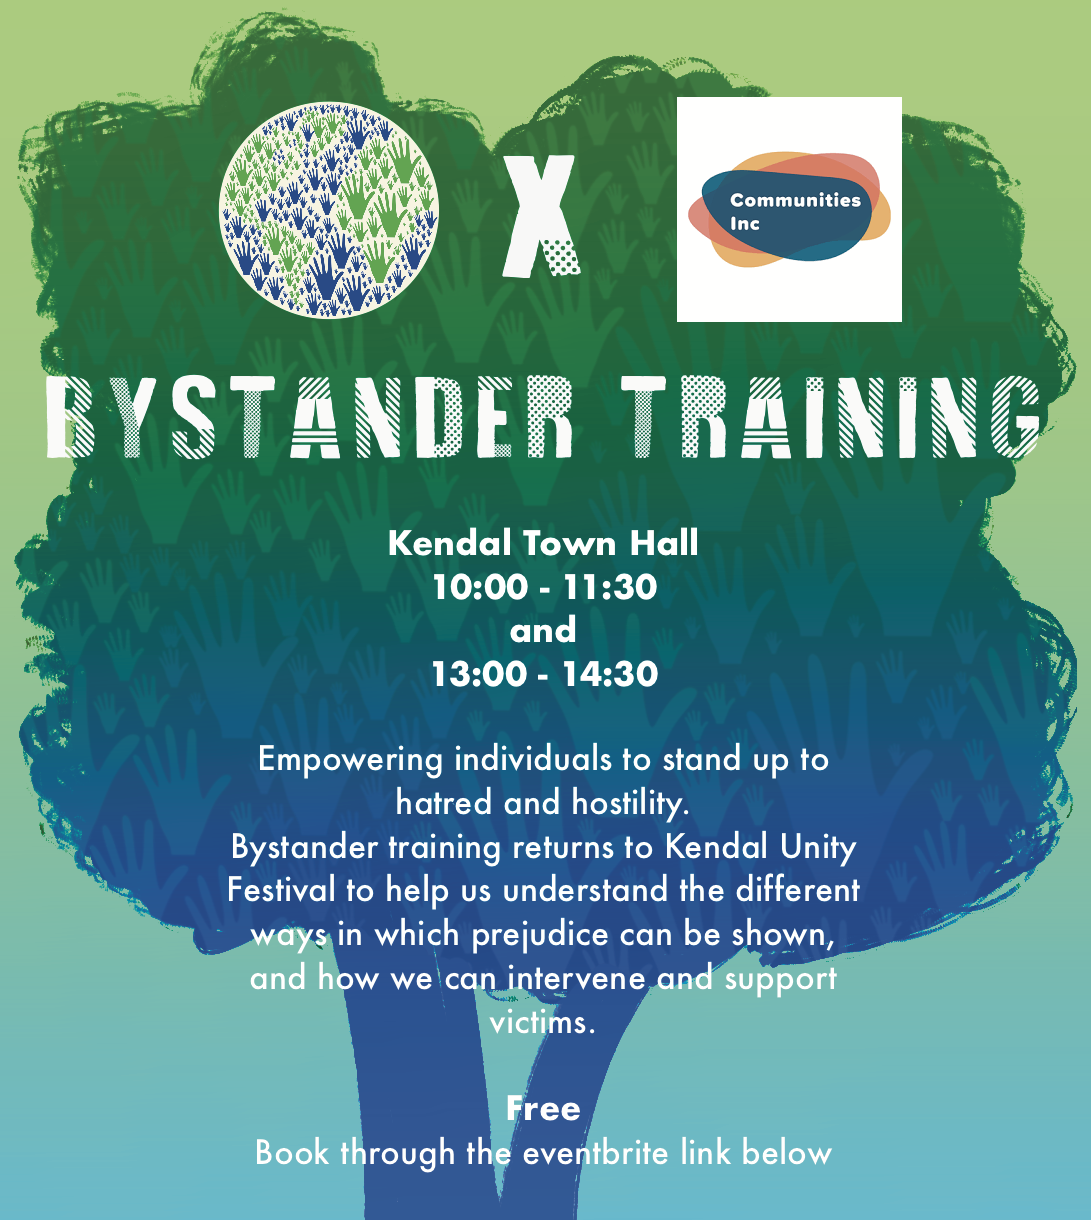 Bystander Training. Kendal town hall 10:00-11:30 and 13:00-14:30. Empowering individuals to stand up to hatred and hostility. Communities Inc brings Bystander Training back toKendal Unity Festival to help us understand the different ways in which prejudice can be shown, and how we can intervene and support victims. Free. Book through the eventbrite link below. 